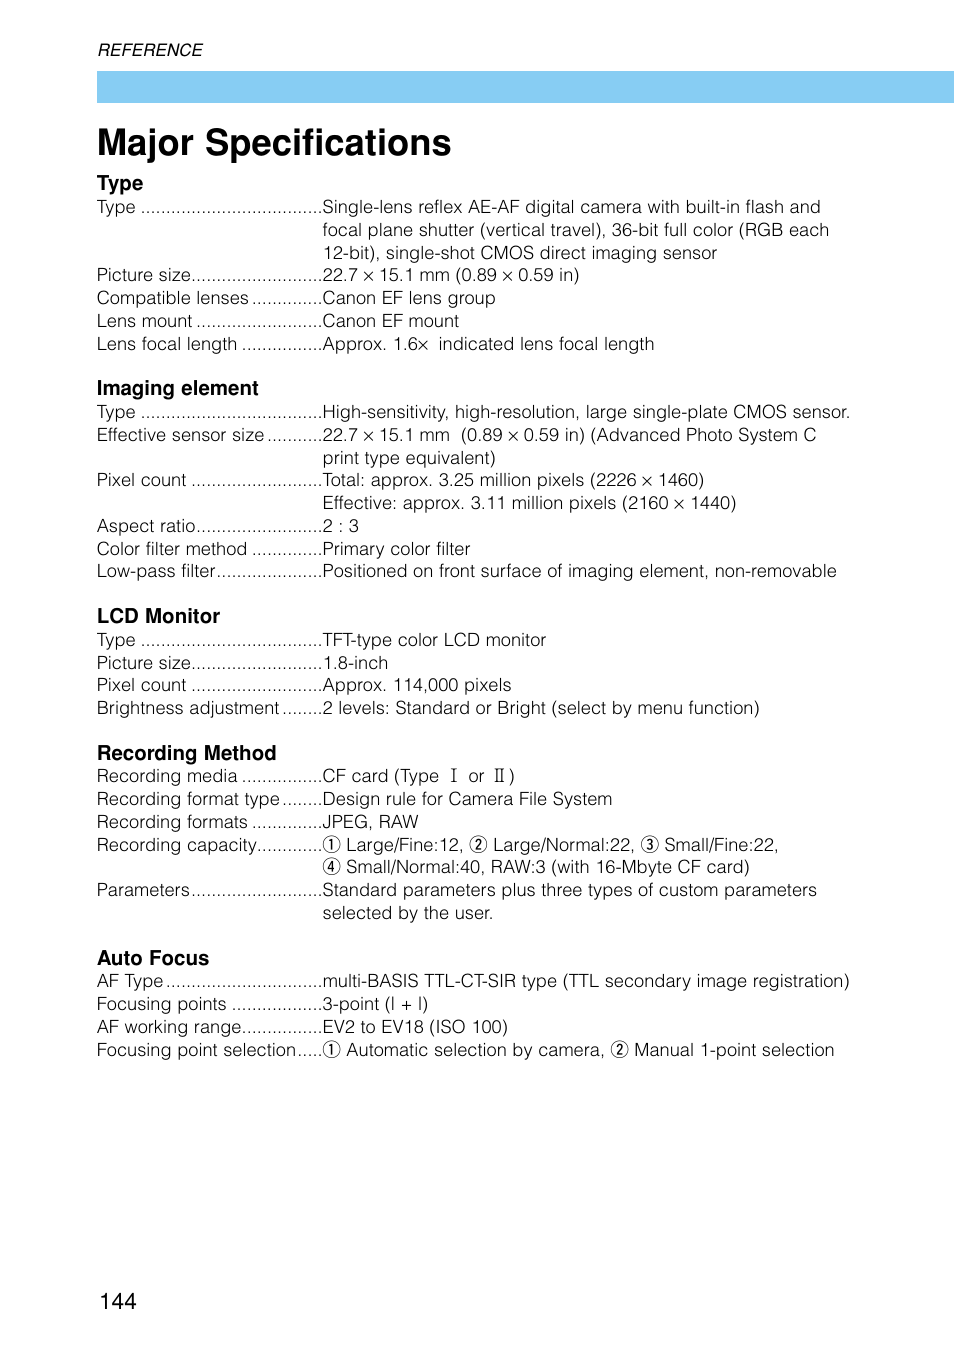 Major specifications | Canon EOS D30 User Manual | Page 144 / 152